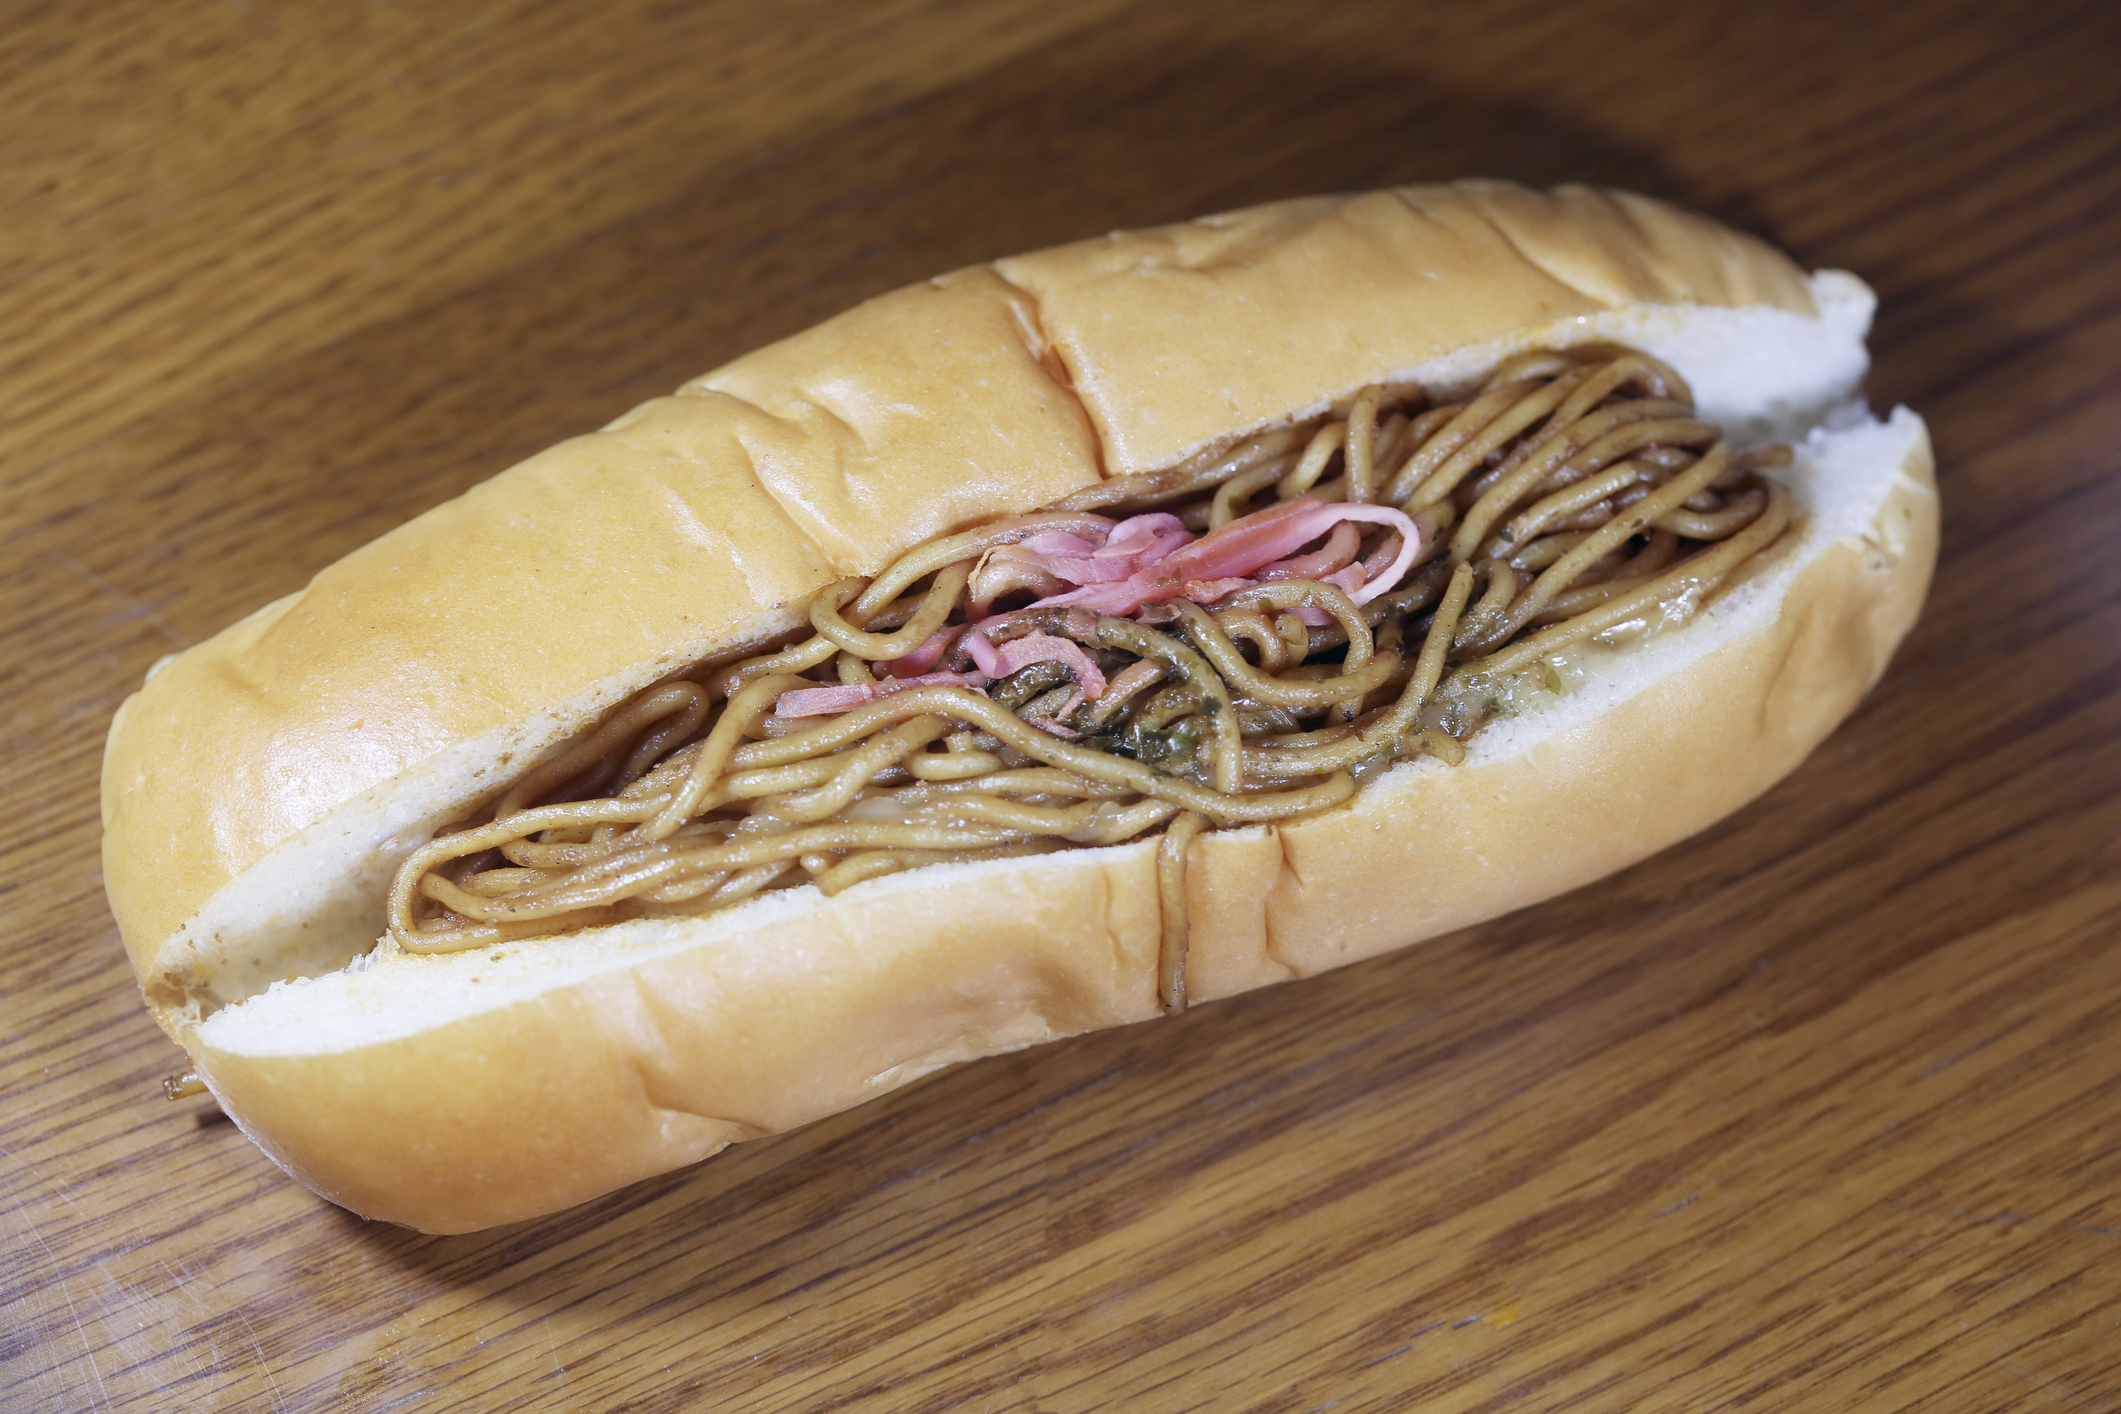 A sandwich filled with noodles and topped with pickled ginger, resting on a wooden surface